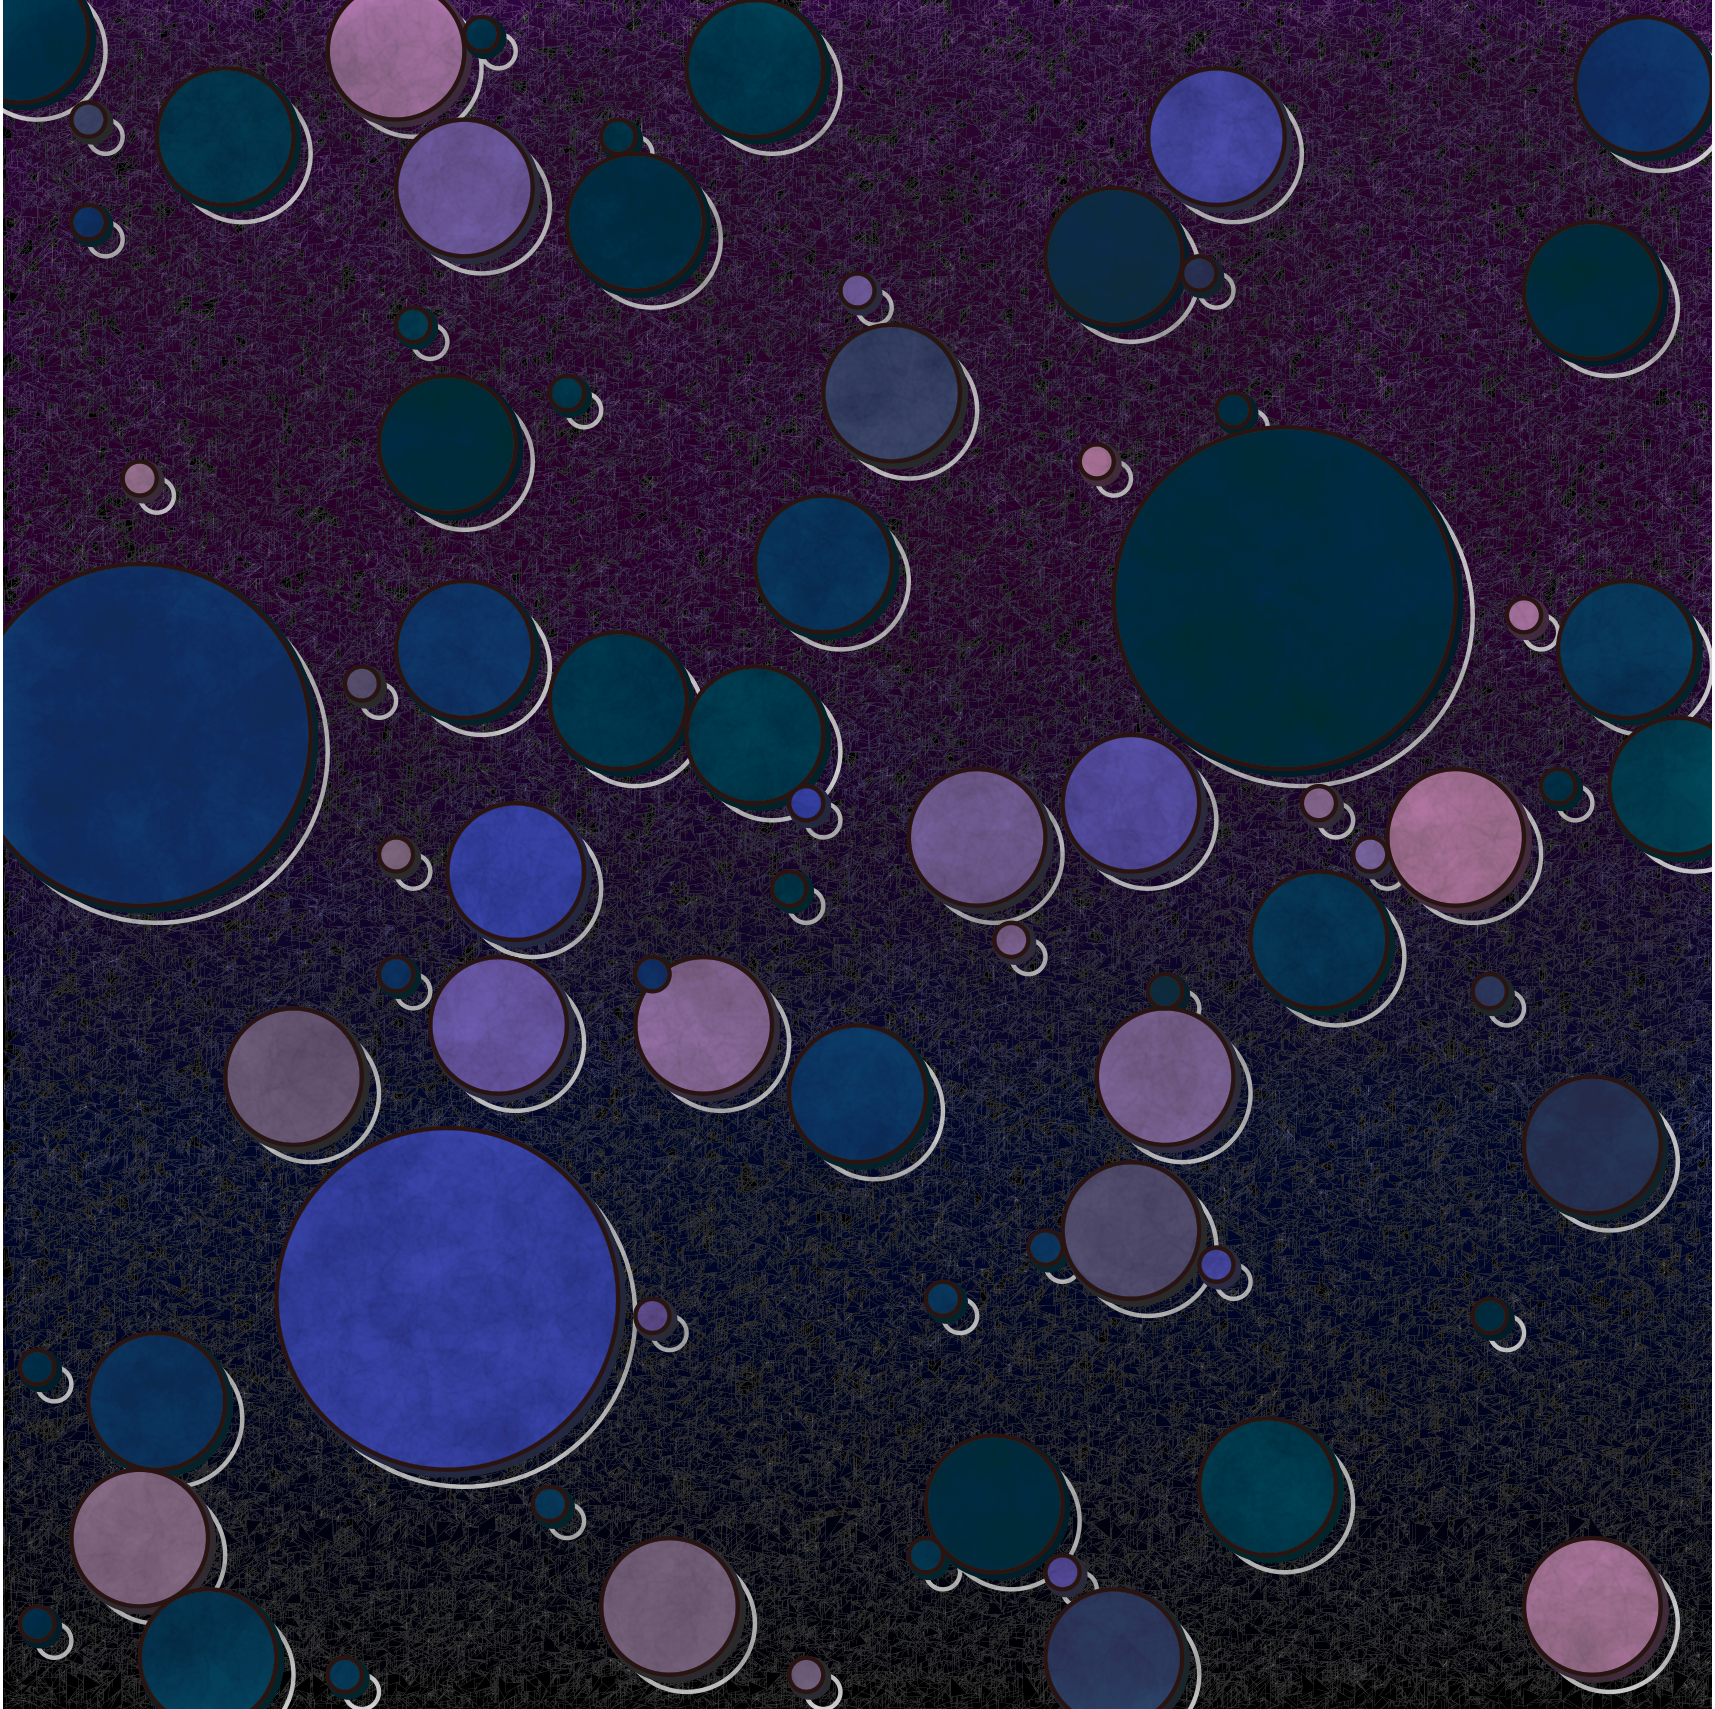 A group of random packed circles in random sizes and colored with a texture blue or purple style. The background is a random pattern of blue and purple lines in a vertical gradient.